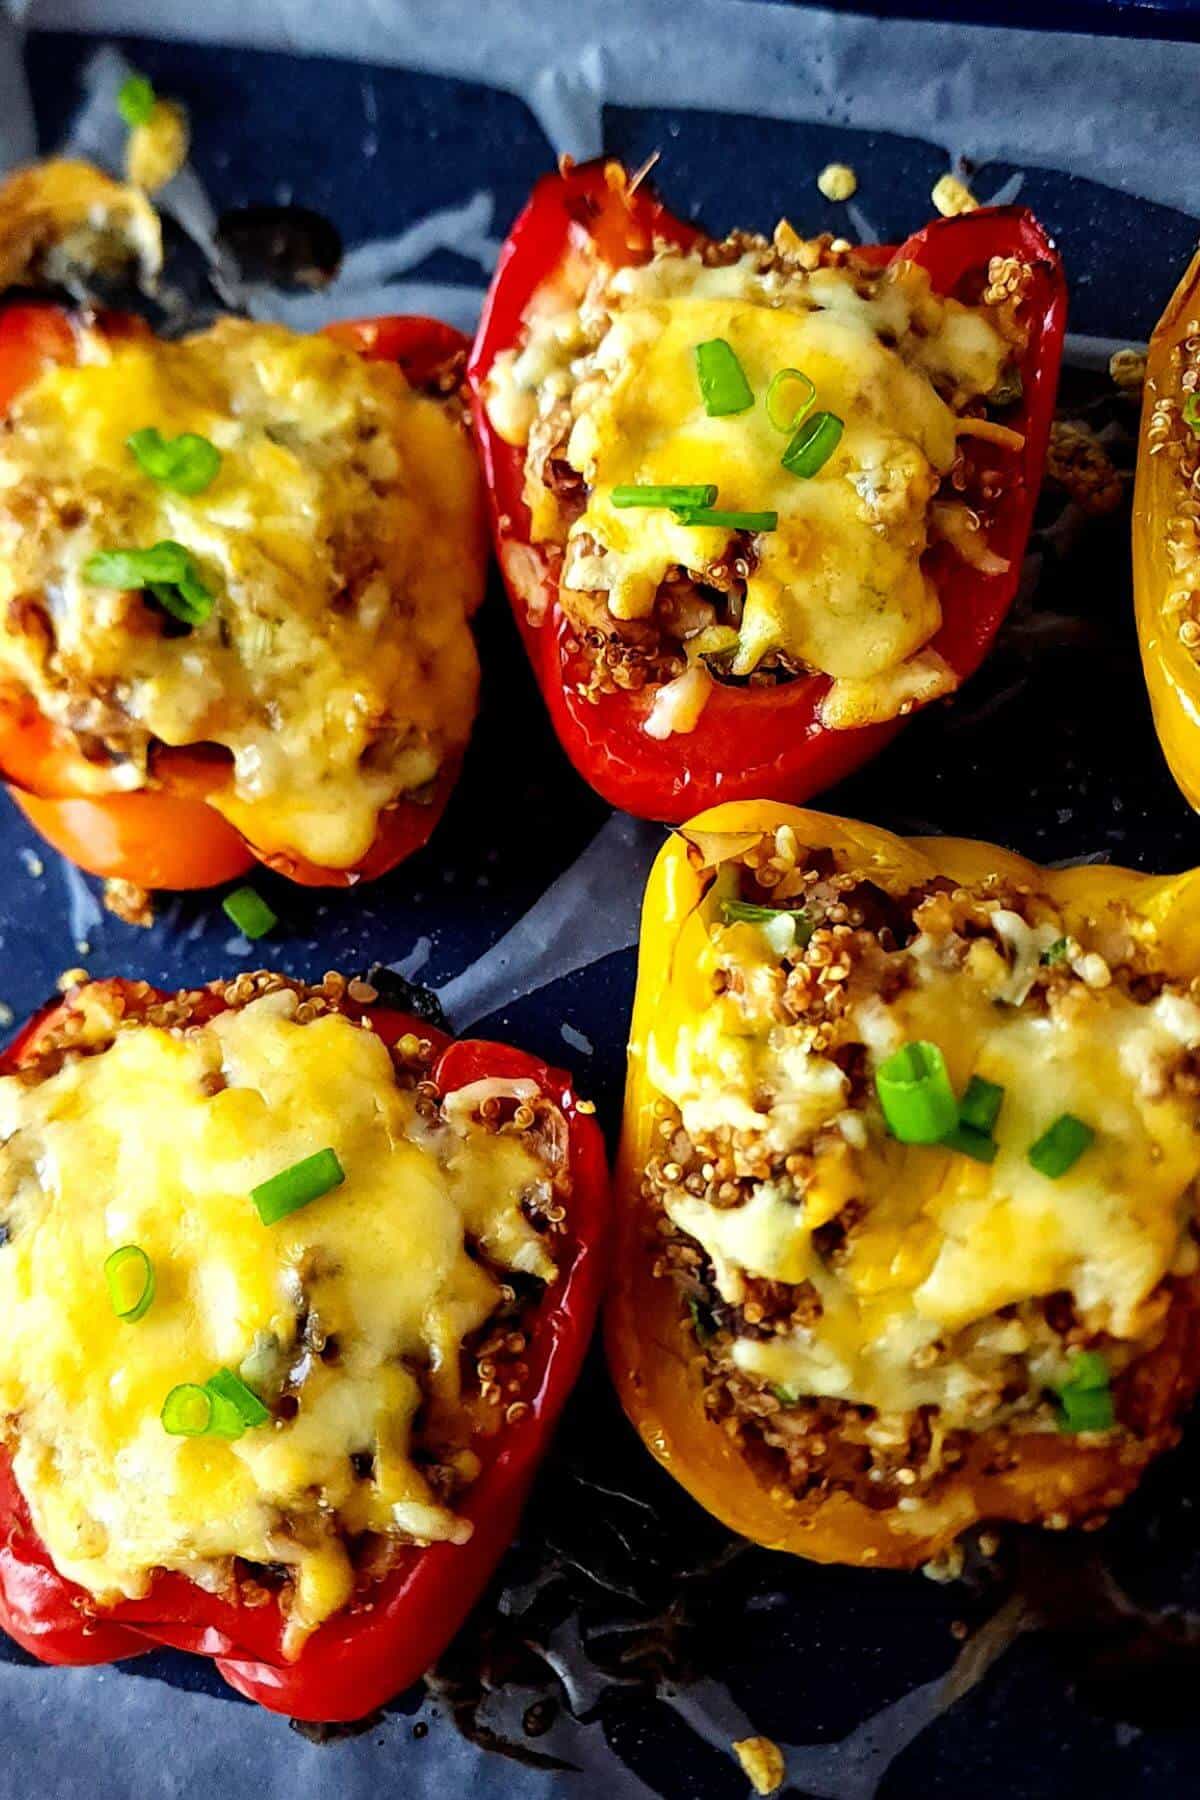 Cheesy mushroom quinoa stuffed bell peppers garnished with chopped spring onion.